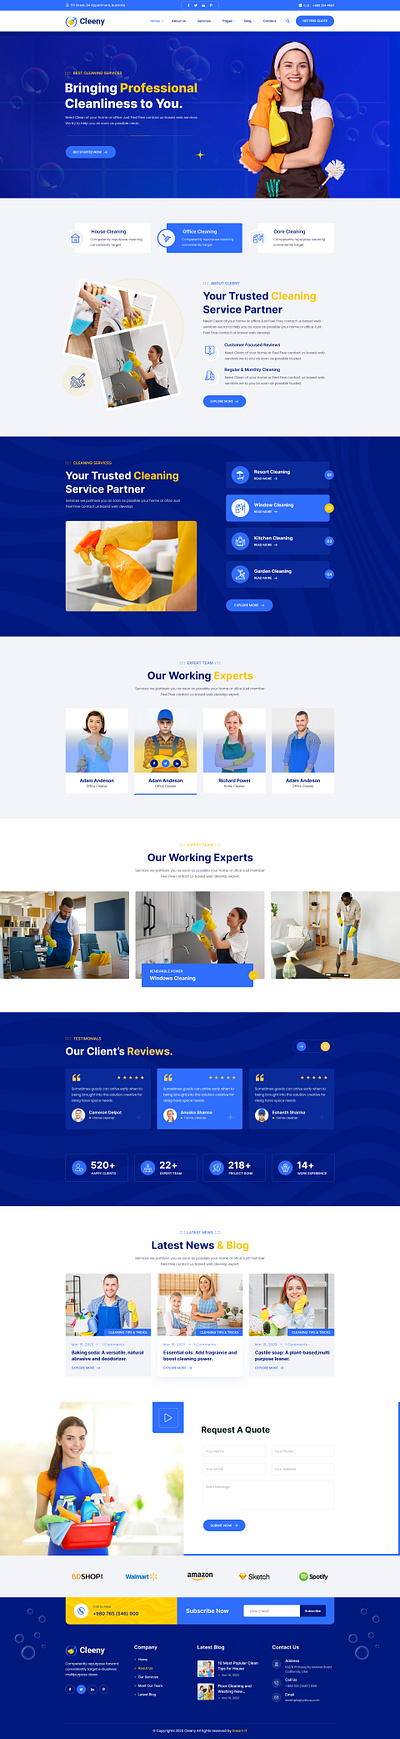 Cleeny - Cleaning Services & Repair Company HTML5 Template repair service